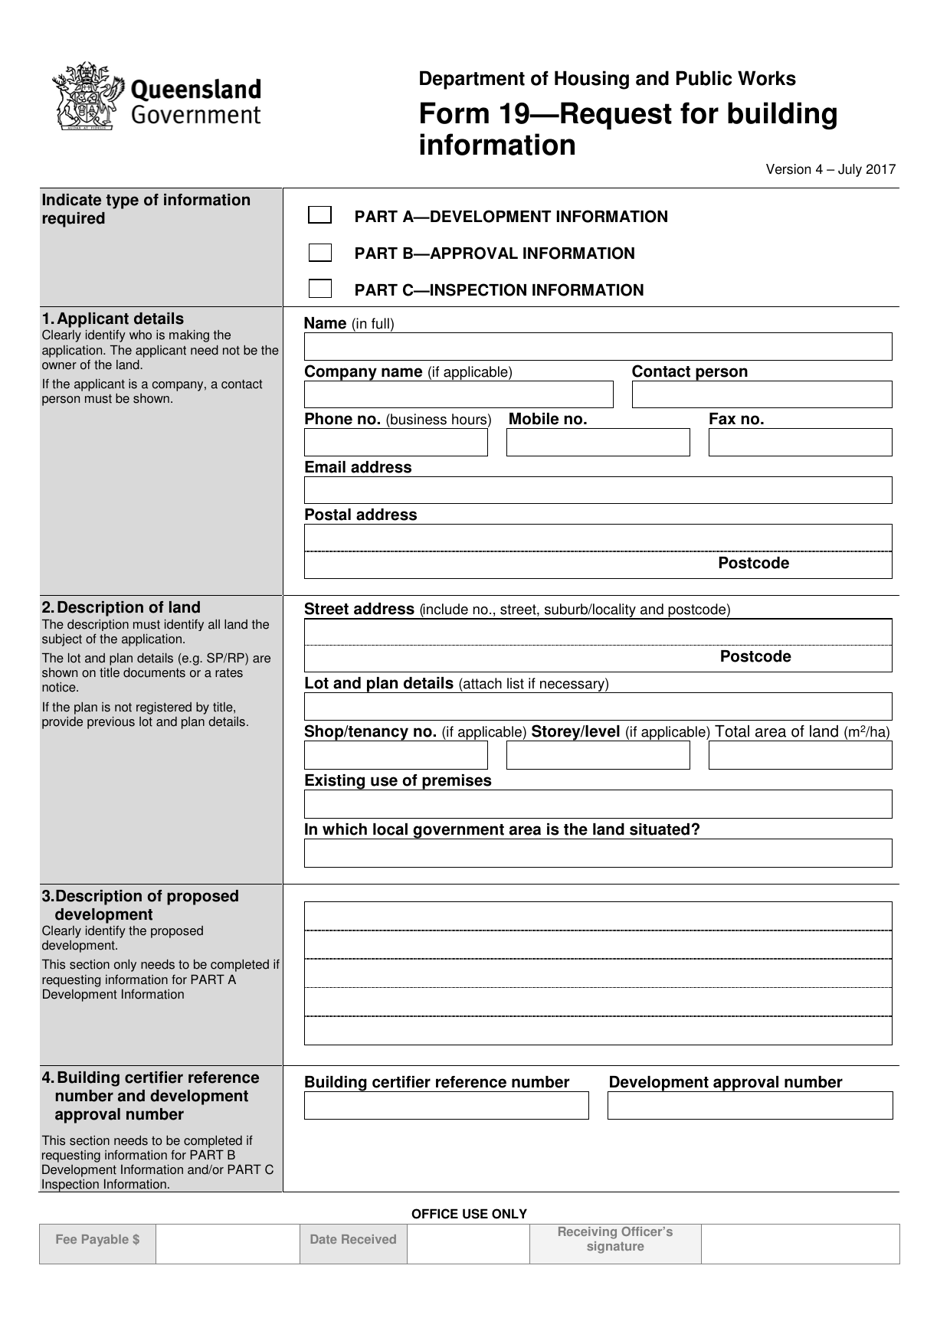 Form 19 Request for Building Information - Queensland, Australia, Page 1